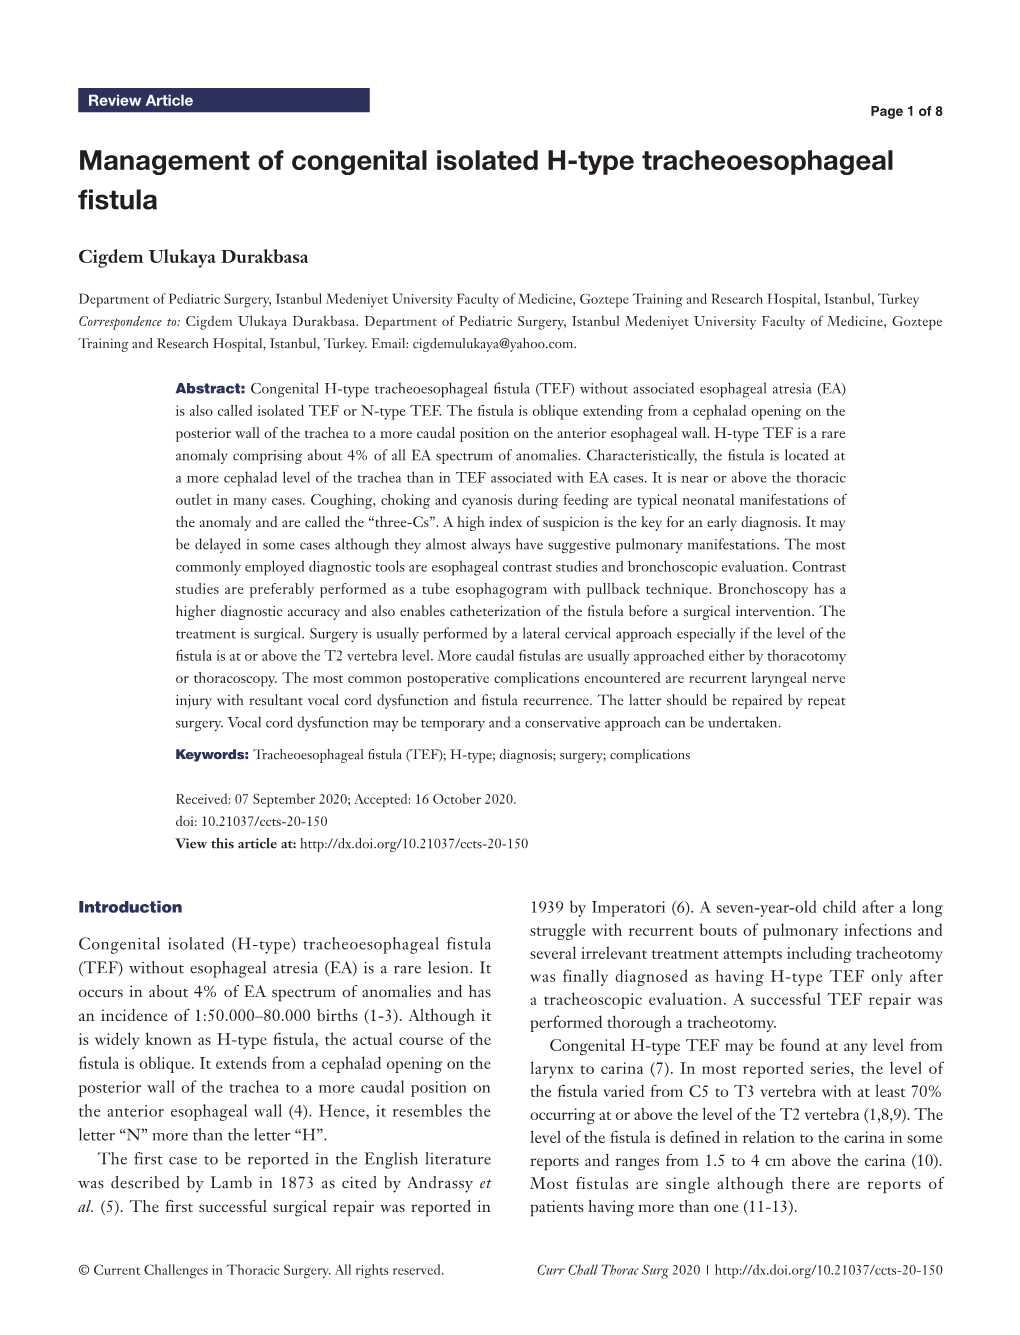 Management of Congenital Isolated H-Type Tracheoesophageal Fistula